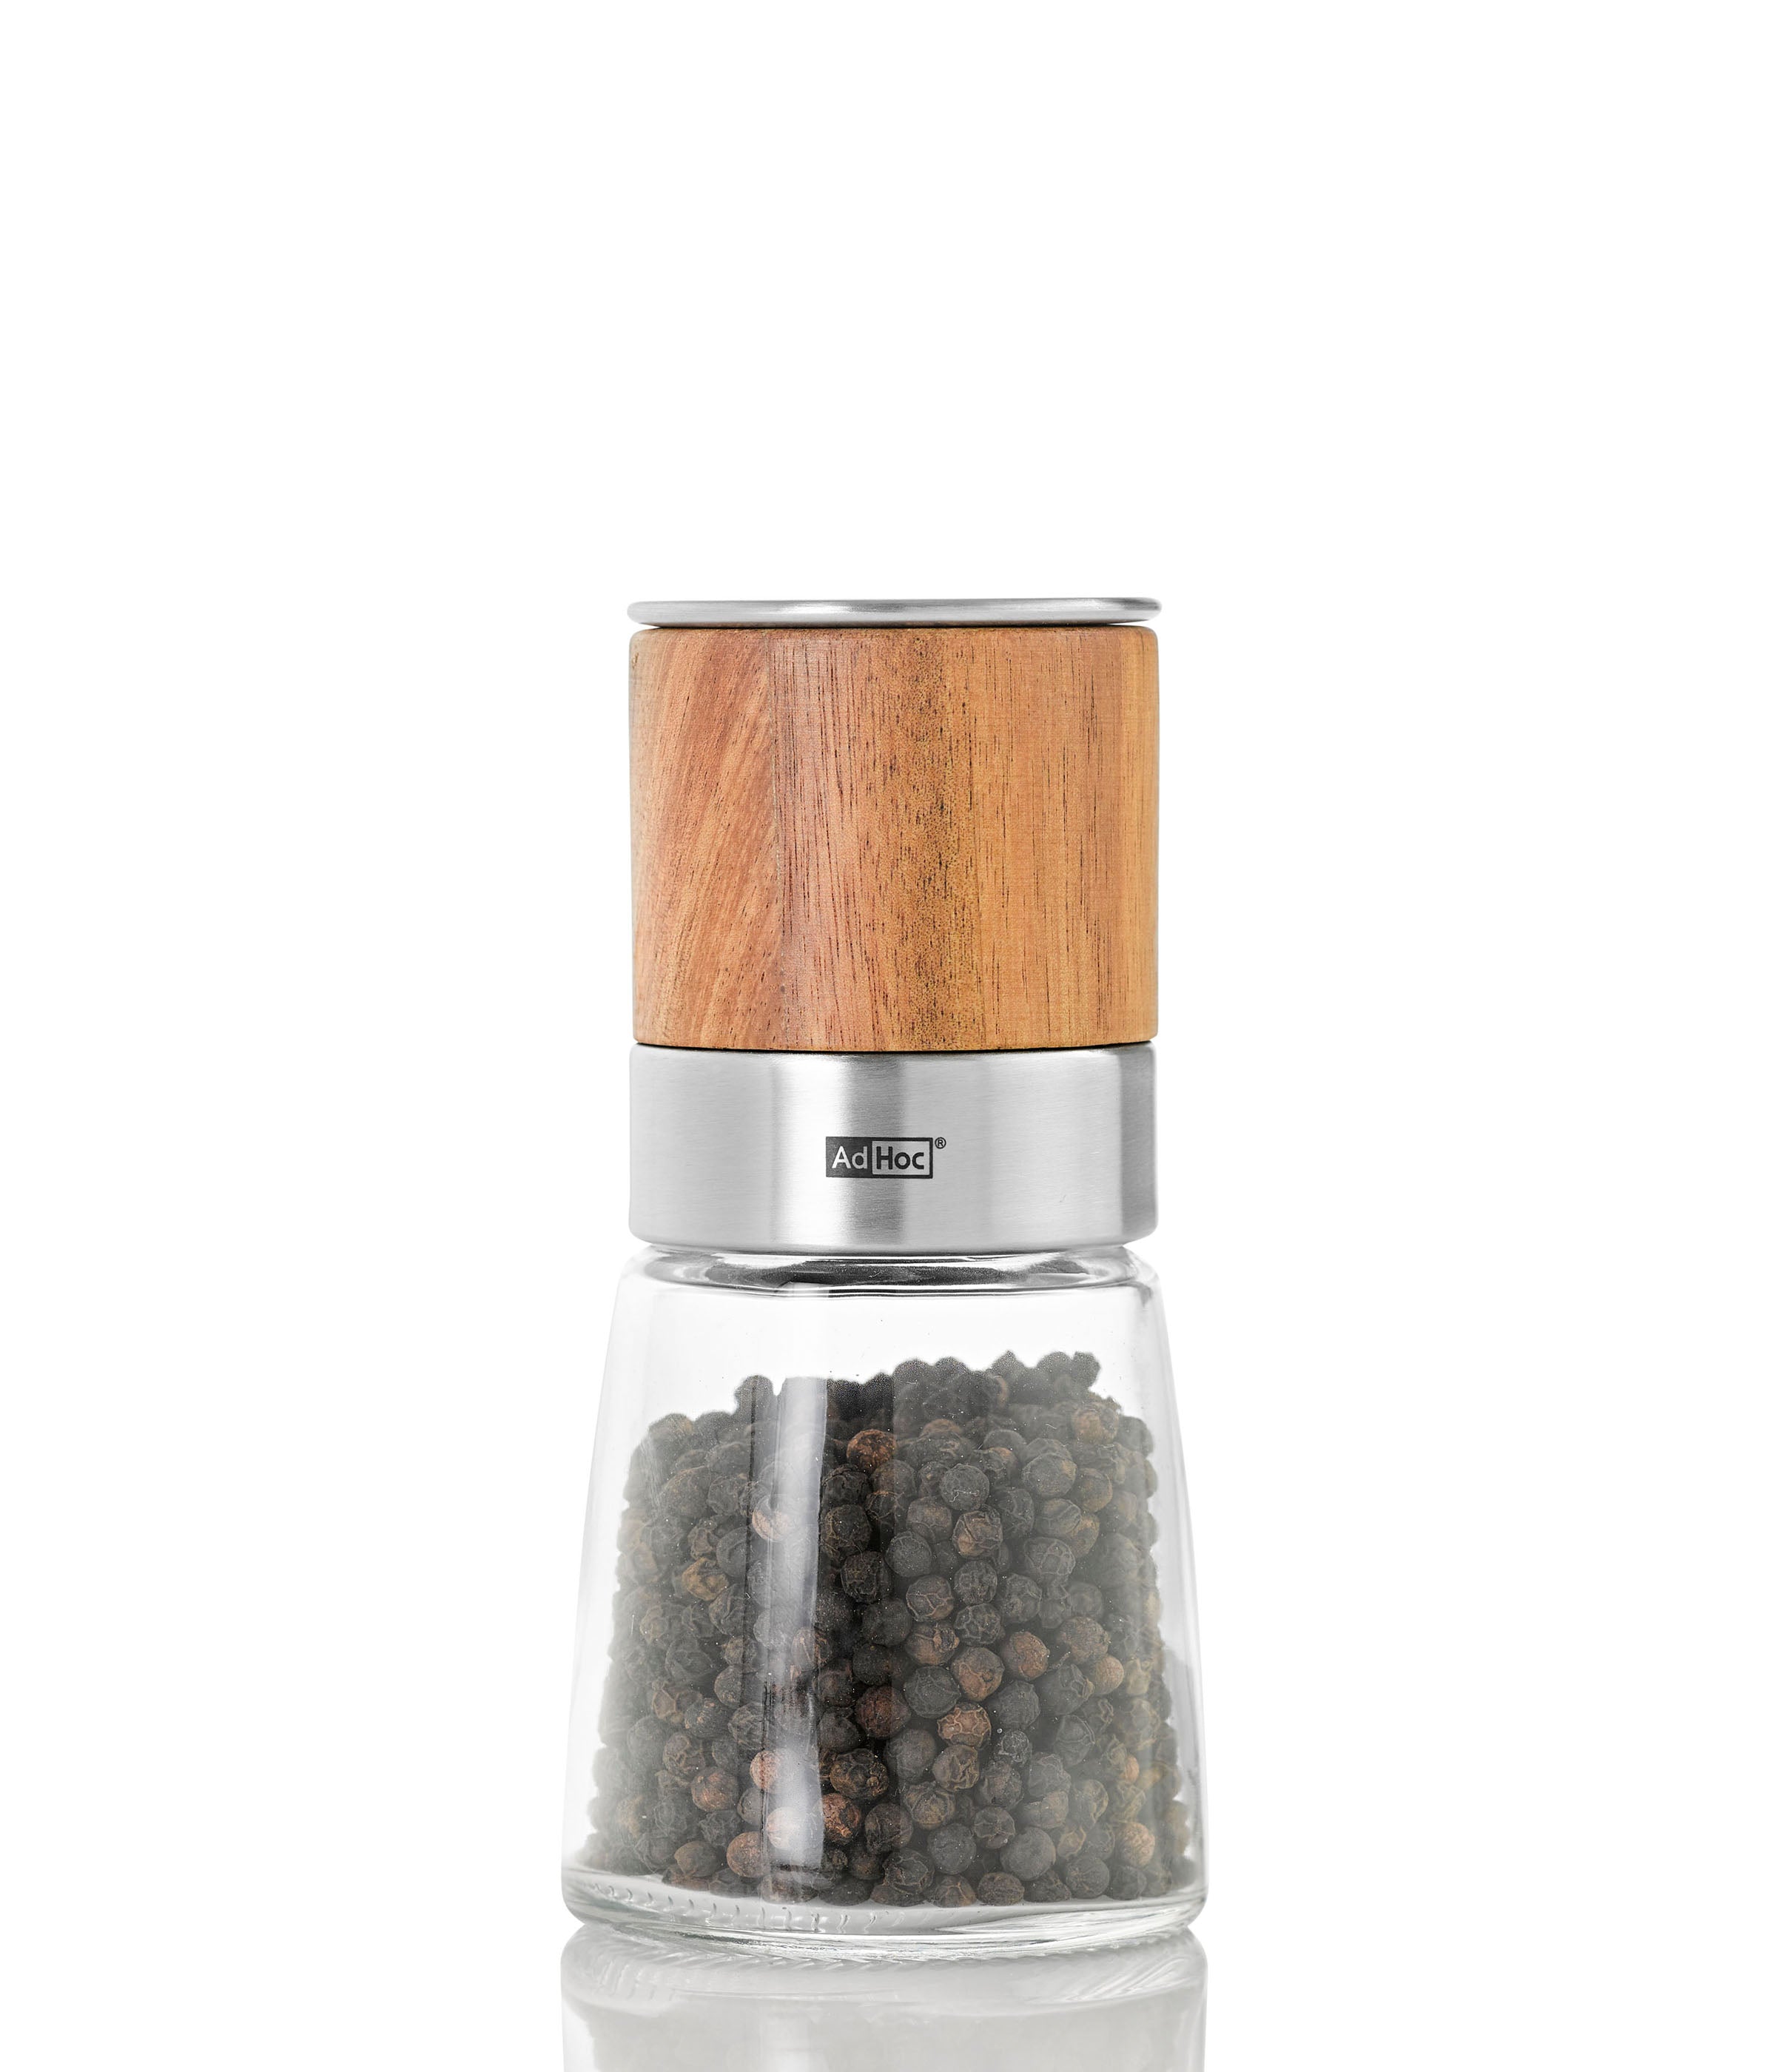 ADHOC Geared Salt or Pepper Mill, 7.5 inch, Stainless Steel. Silver